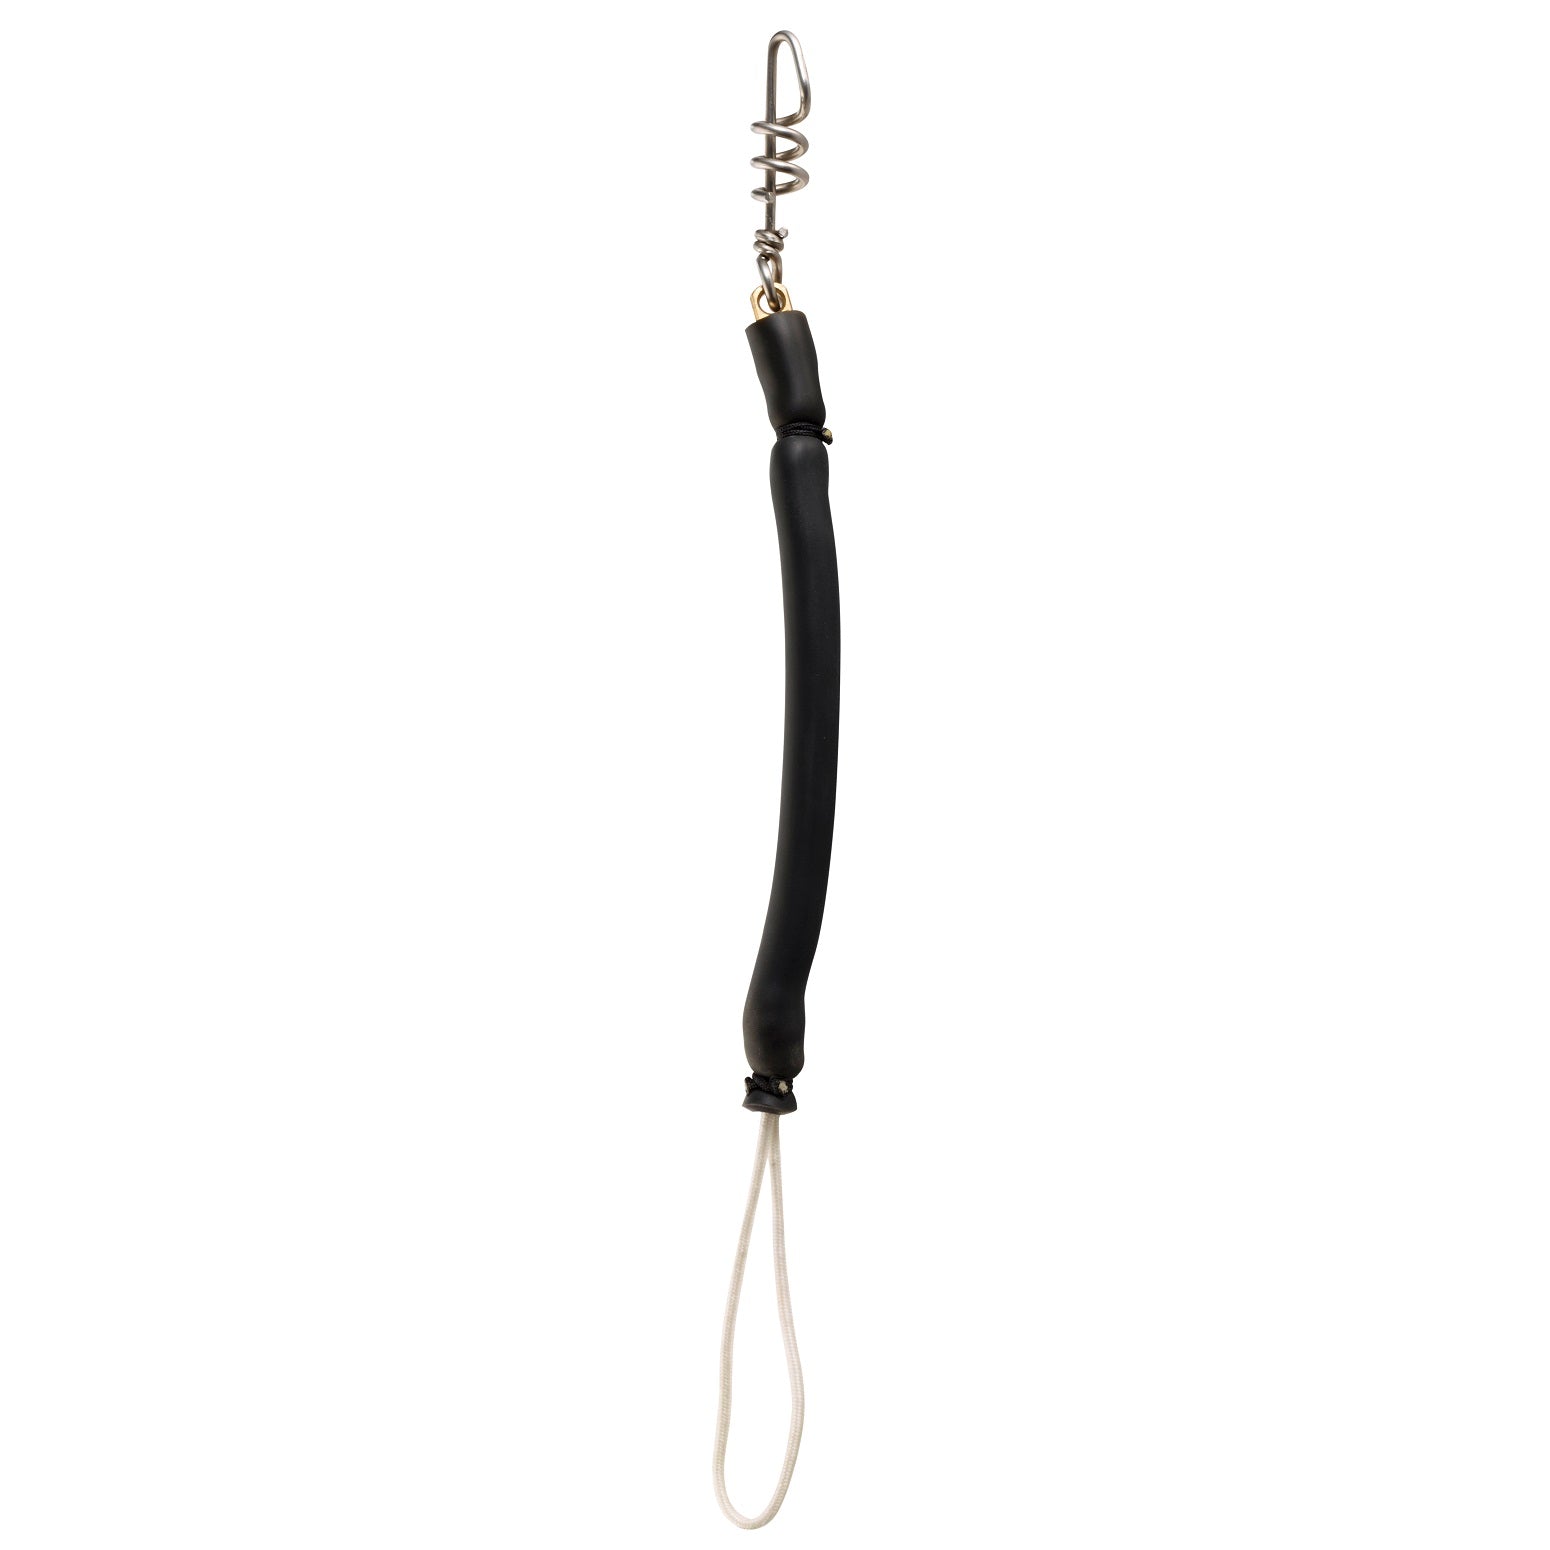 Shock Cord with pigtail swivel